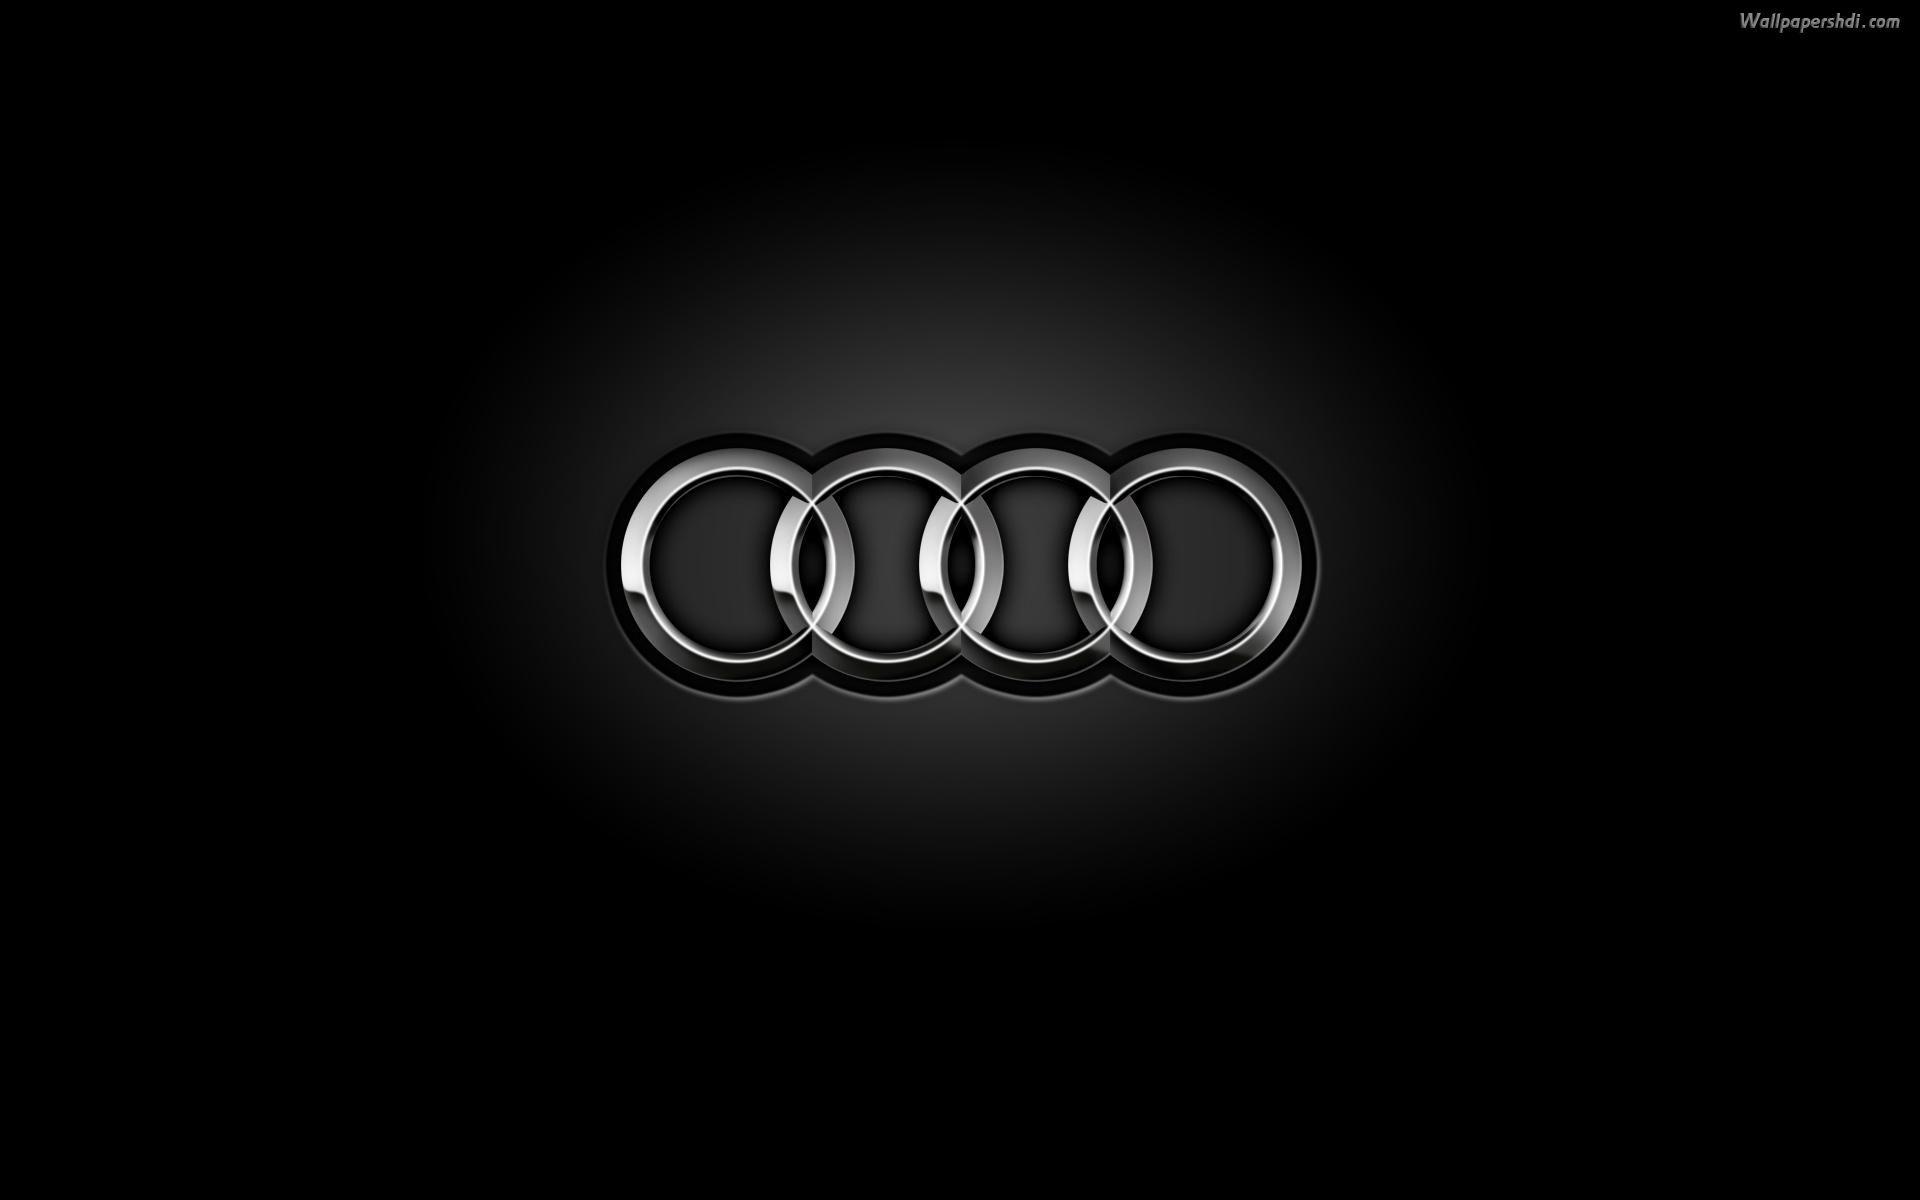 Windows Logo Audi HD For Free Background Wallpaper With 1920x1200